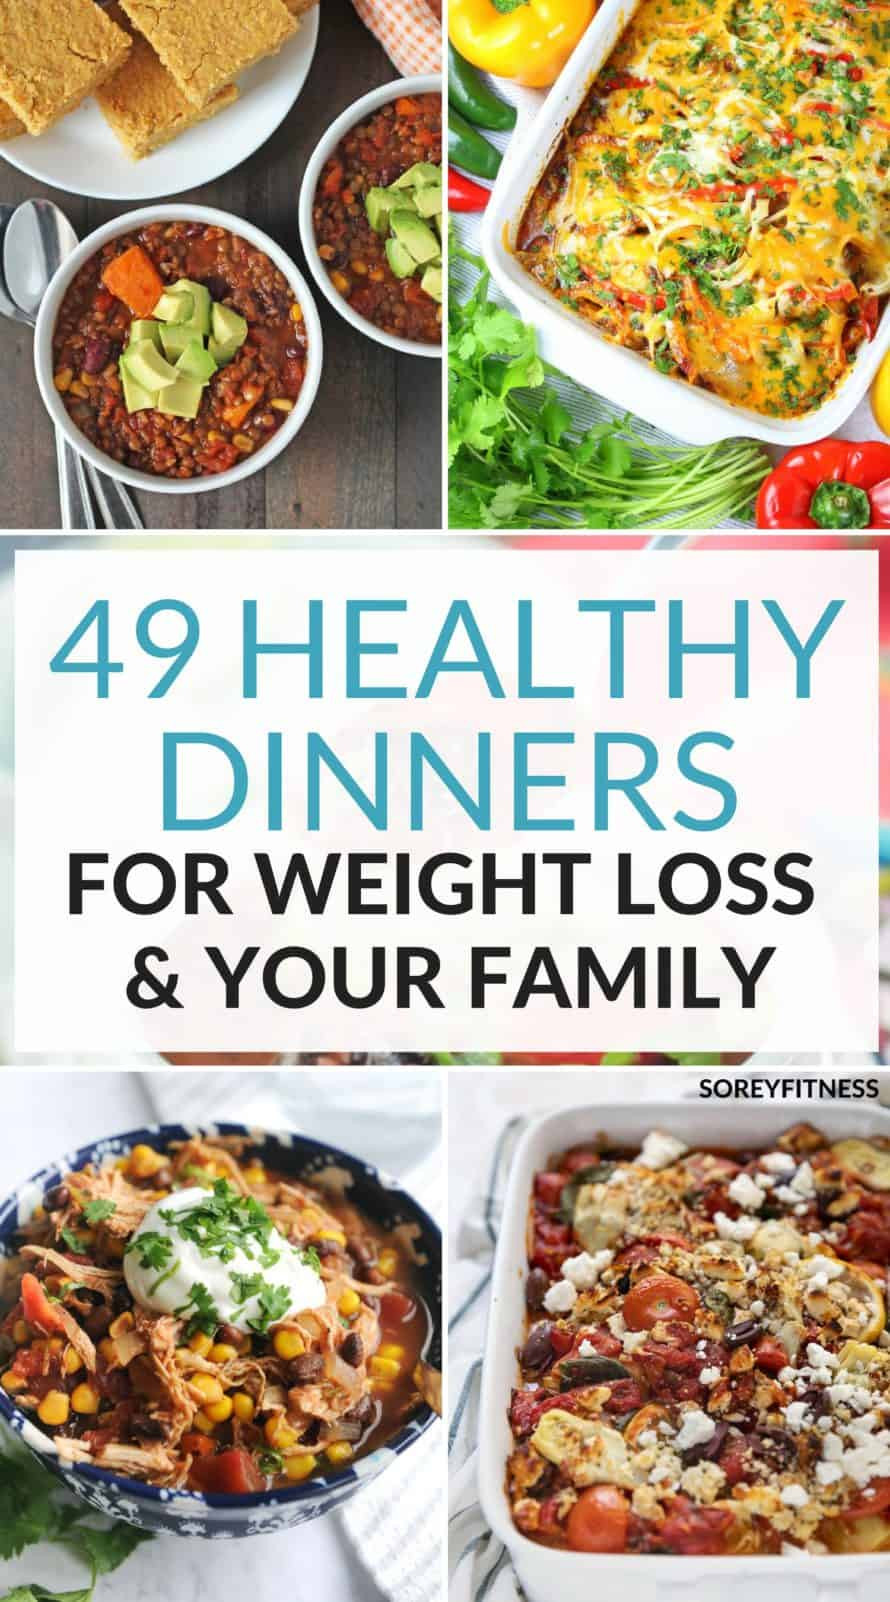 Healthy Dinner Recipes For Weight Loss
 Healthy Dinner Ideas For Weight Loss 49 Quick Easy Recipes